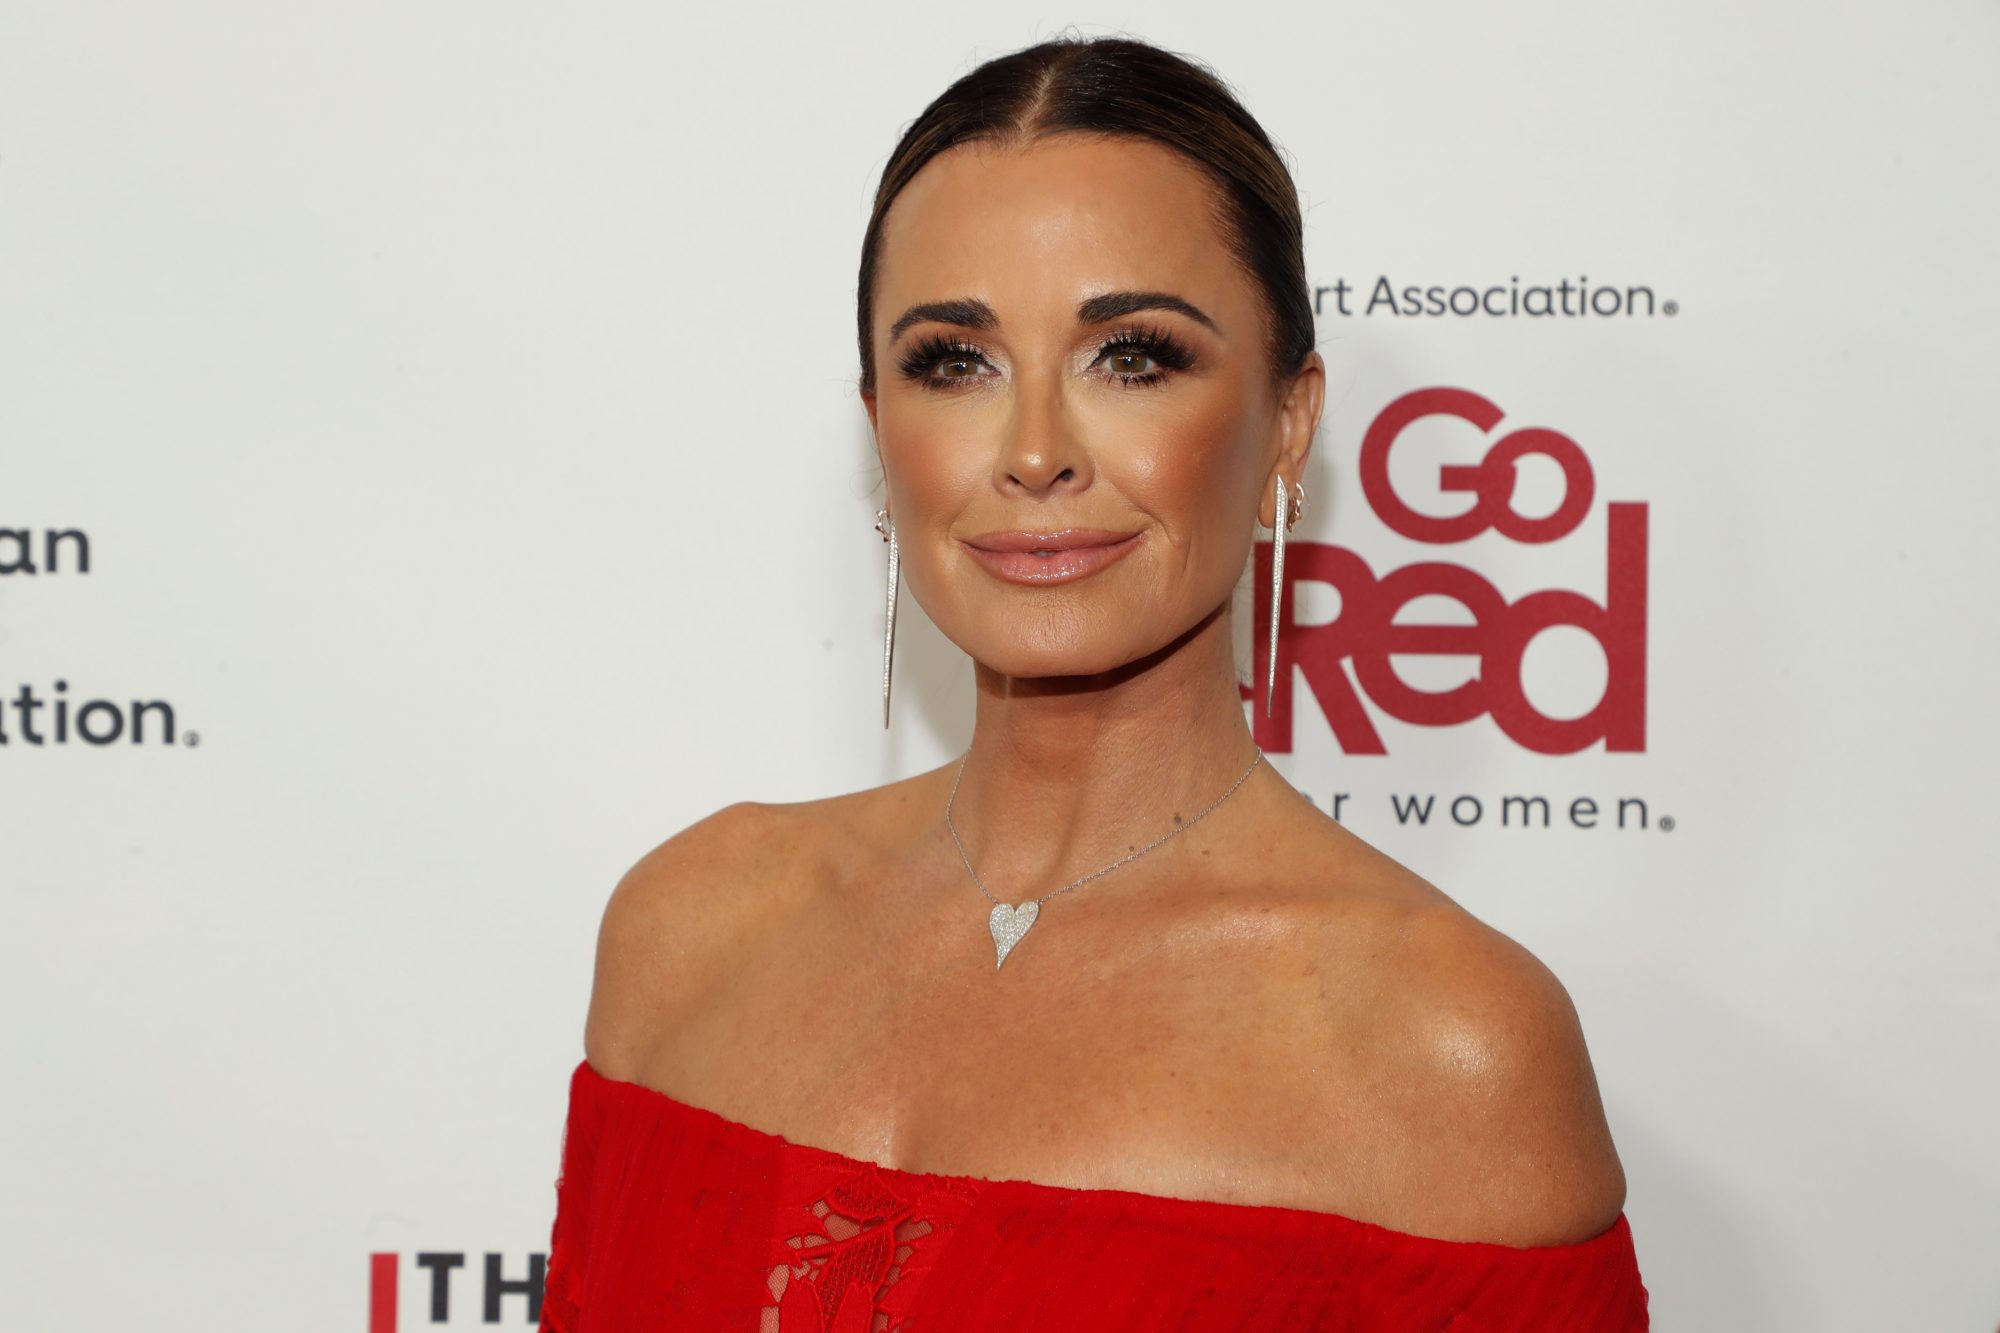 Kyle Richards' Galentine's Day Ideas Include a Game From RHOBH